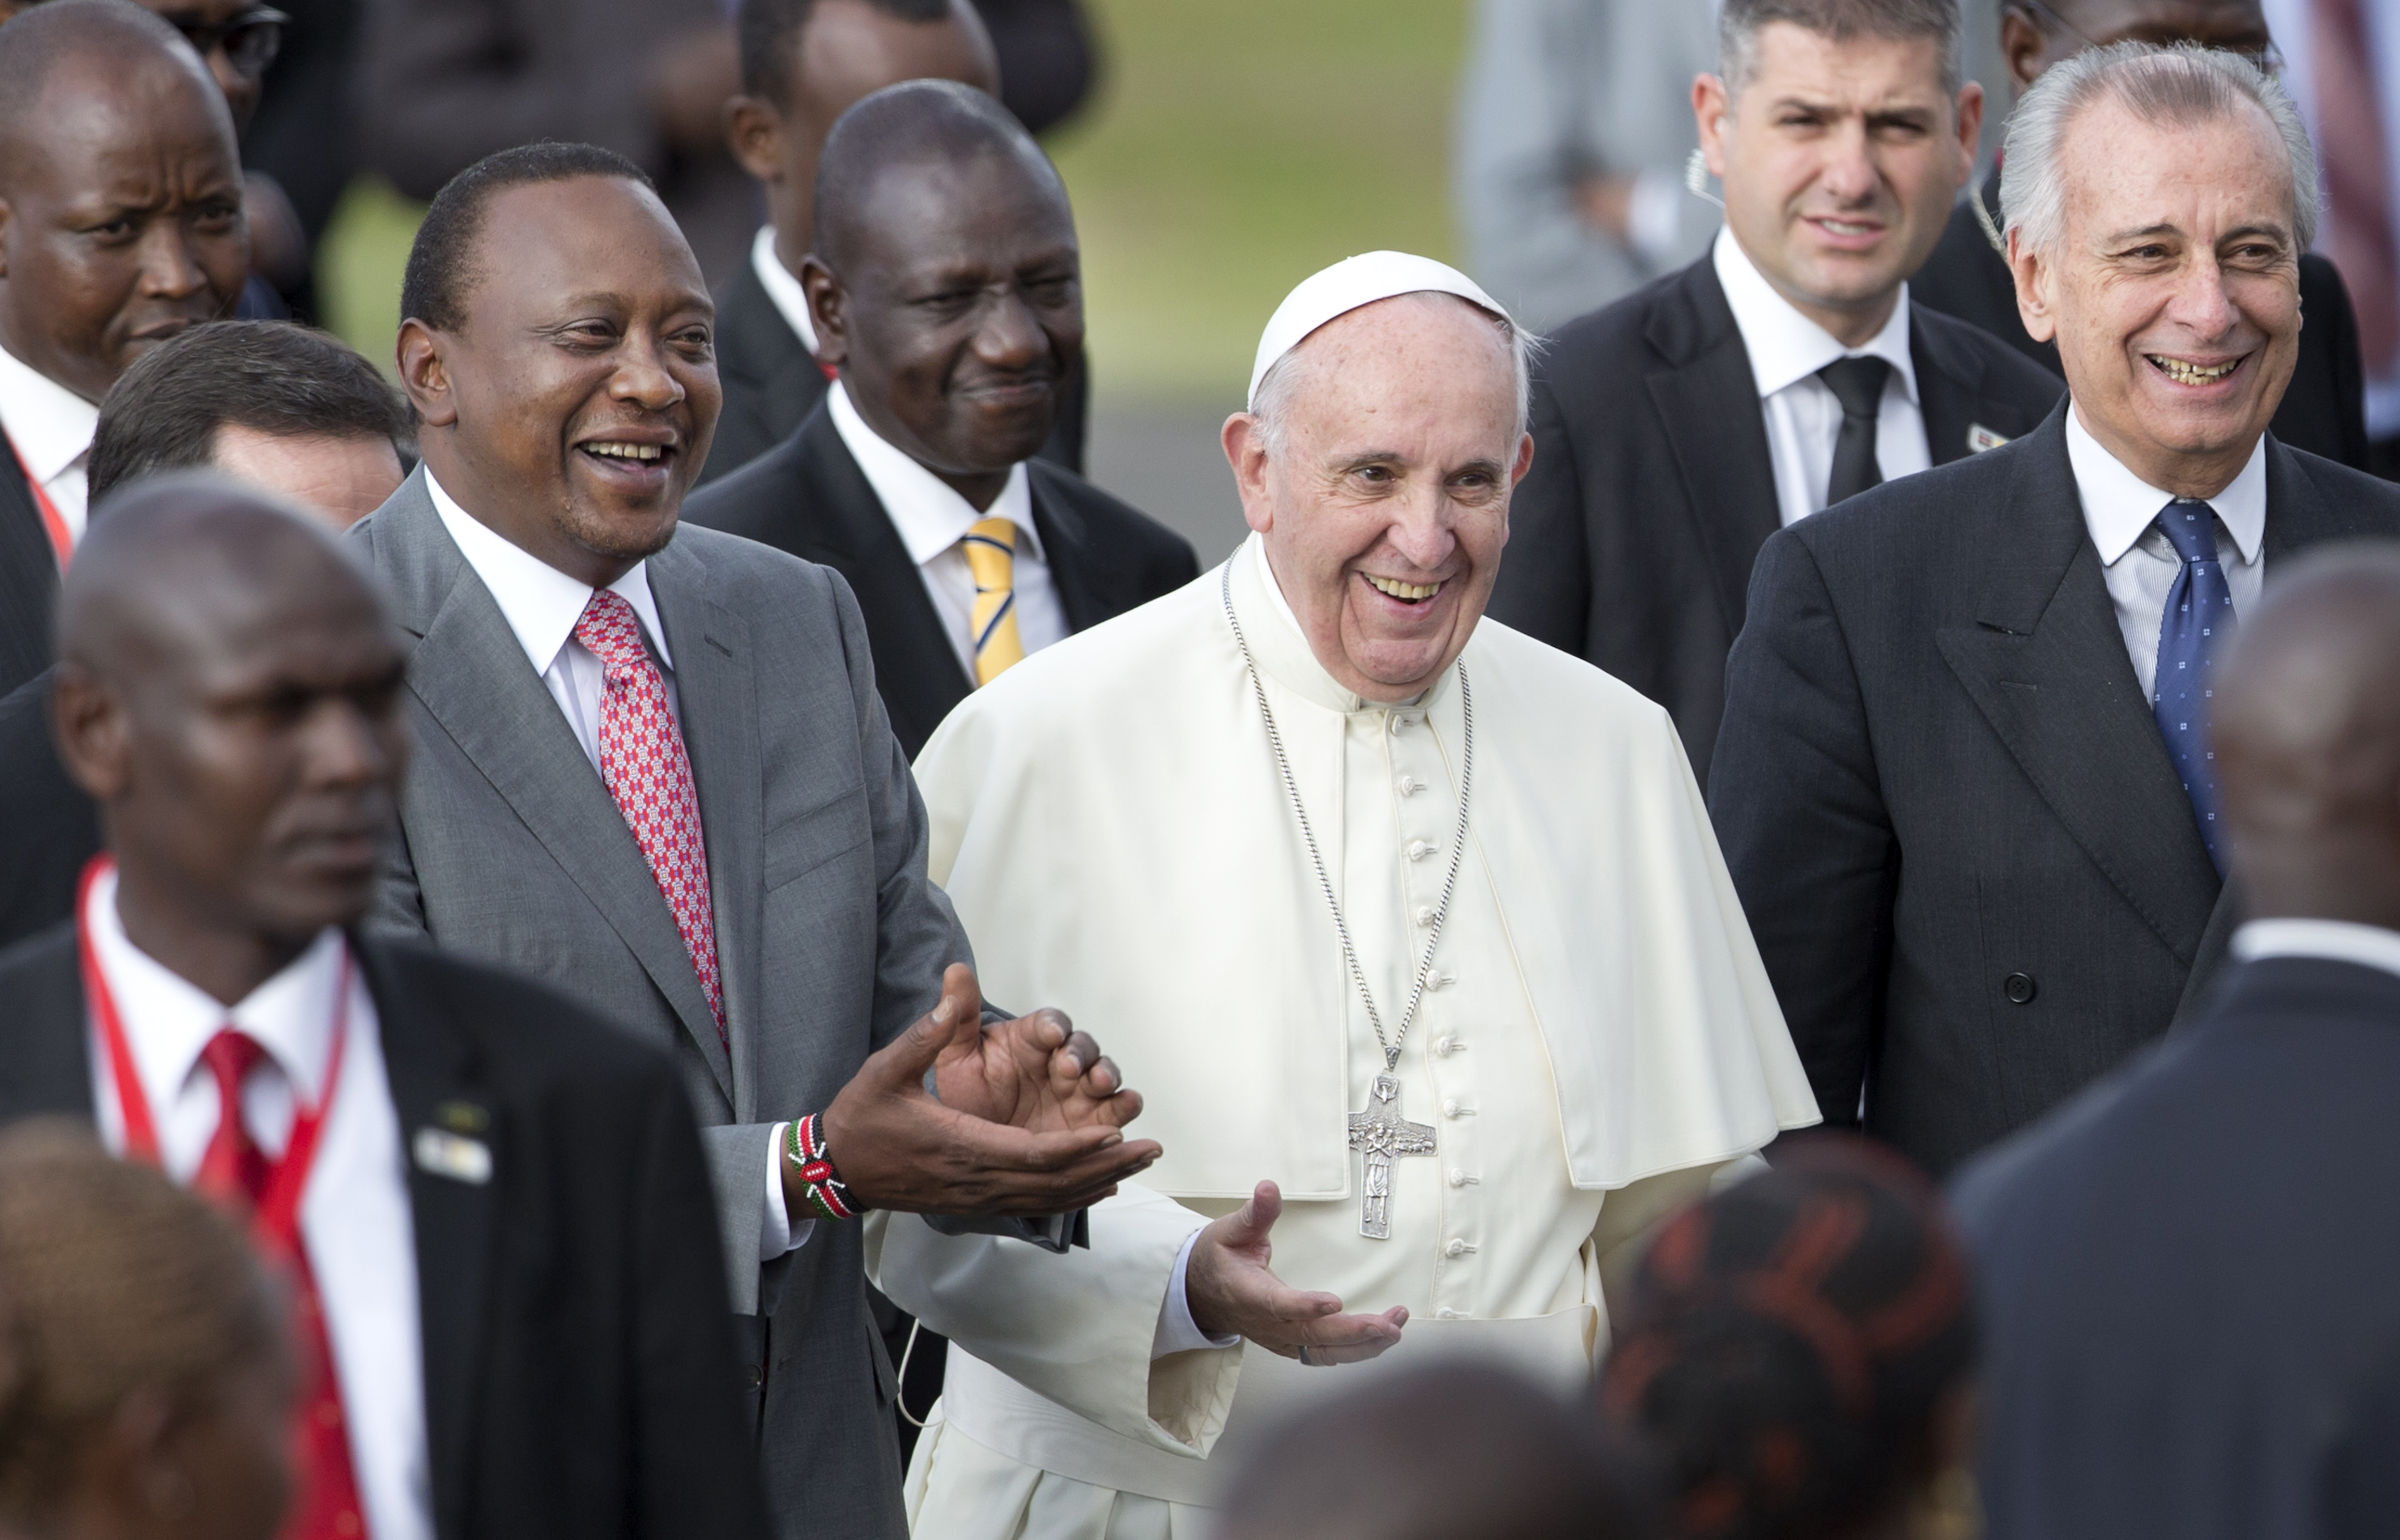 Pope Francis, center, is accompanied by Kenya's President Uhuru Kenyatta, left, and Deputy President William Ruto, center-left, on his arrival at the airport in Nairobi, Kenya Wednesday, Nov. 25, 2015. Pope Francis left Wednesday for his first-ever visit to the continent, a whirlwind pilgrimage to Kenya, Uganda and the Central African Republic, bringing a message of peace and reconciliation to an Africa torn by extremist violence. (AP Photo/Ben Curtis)